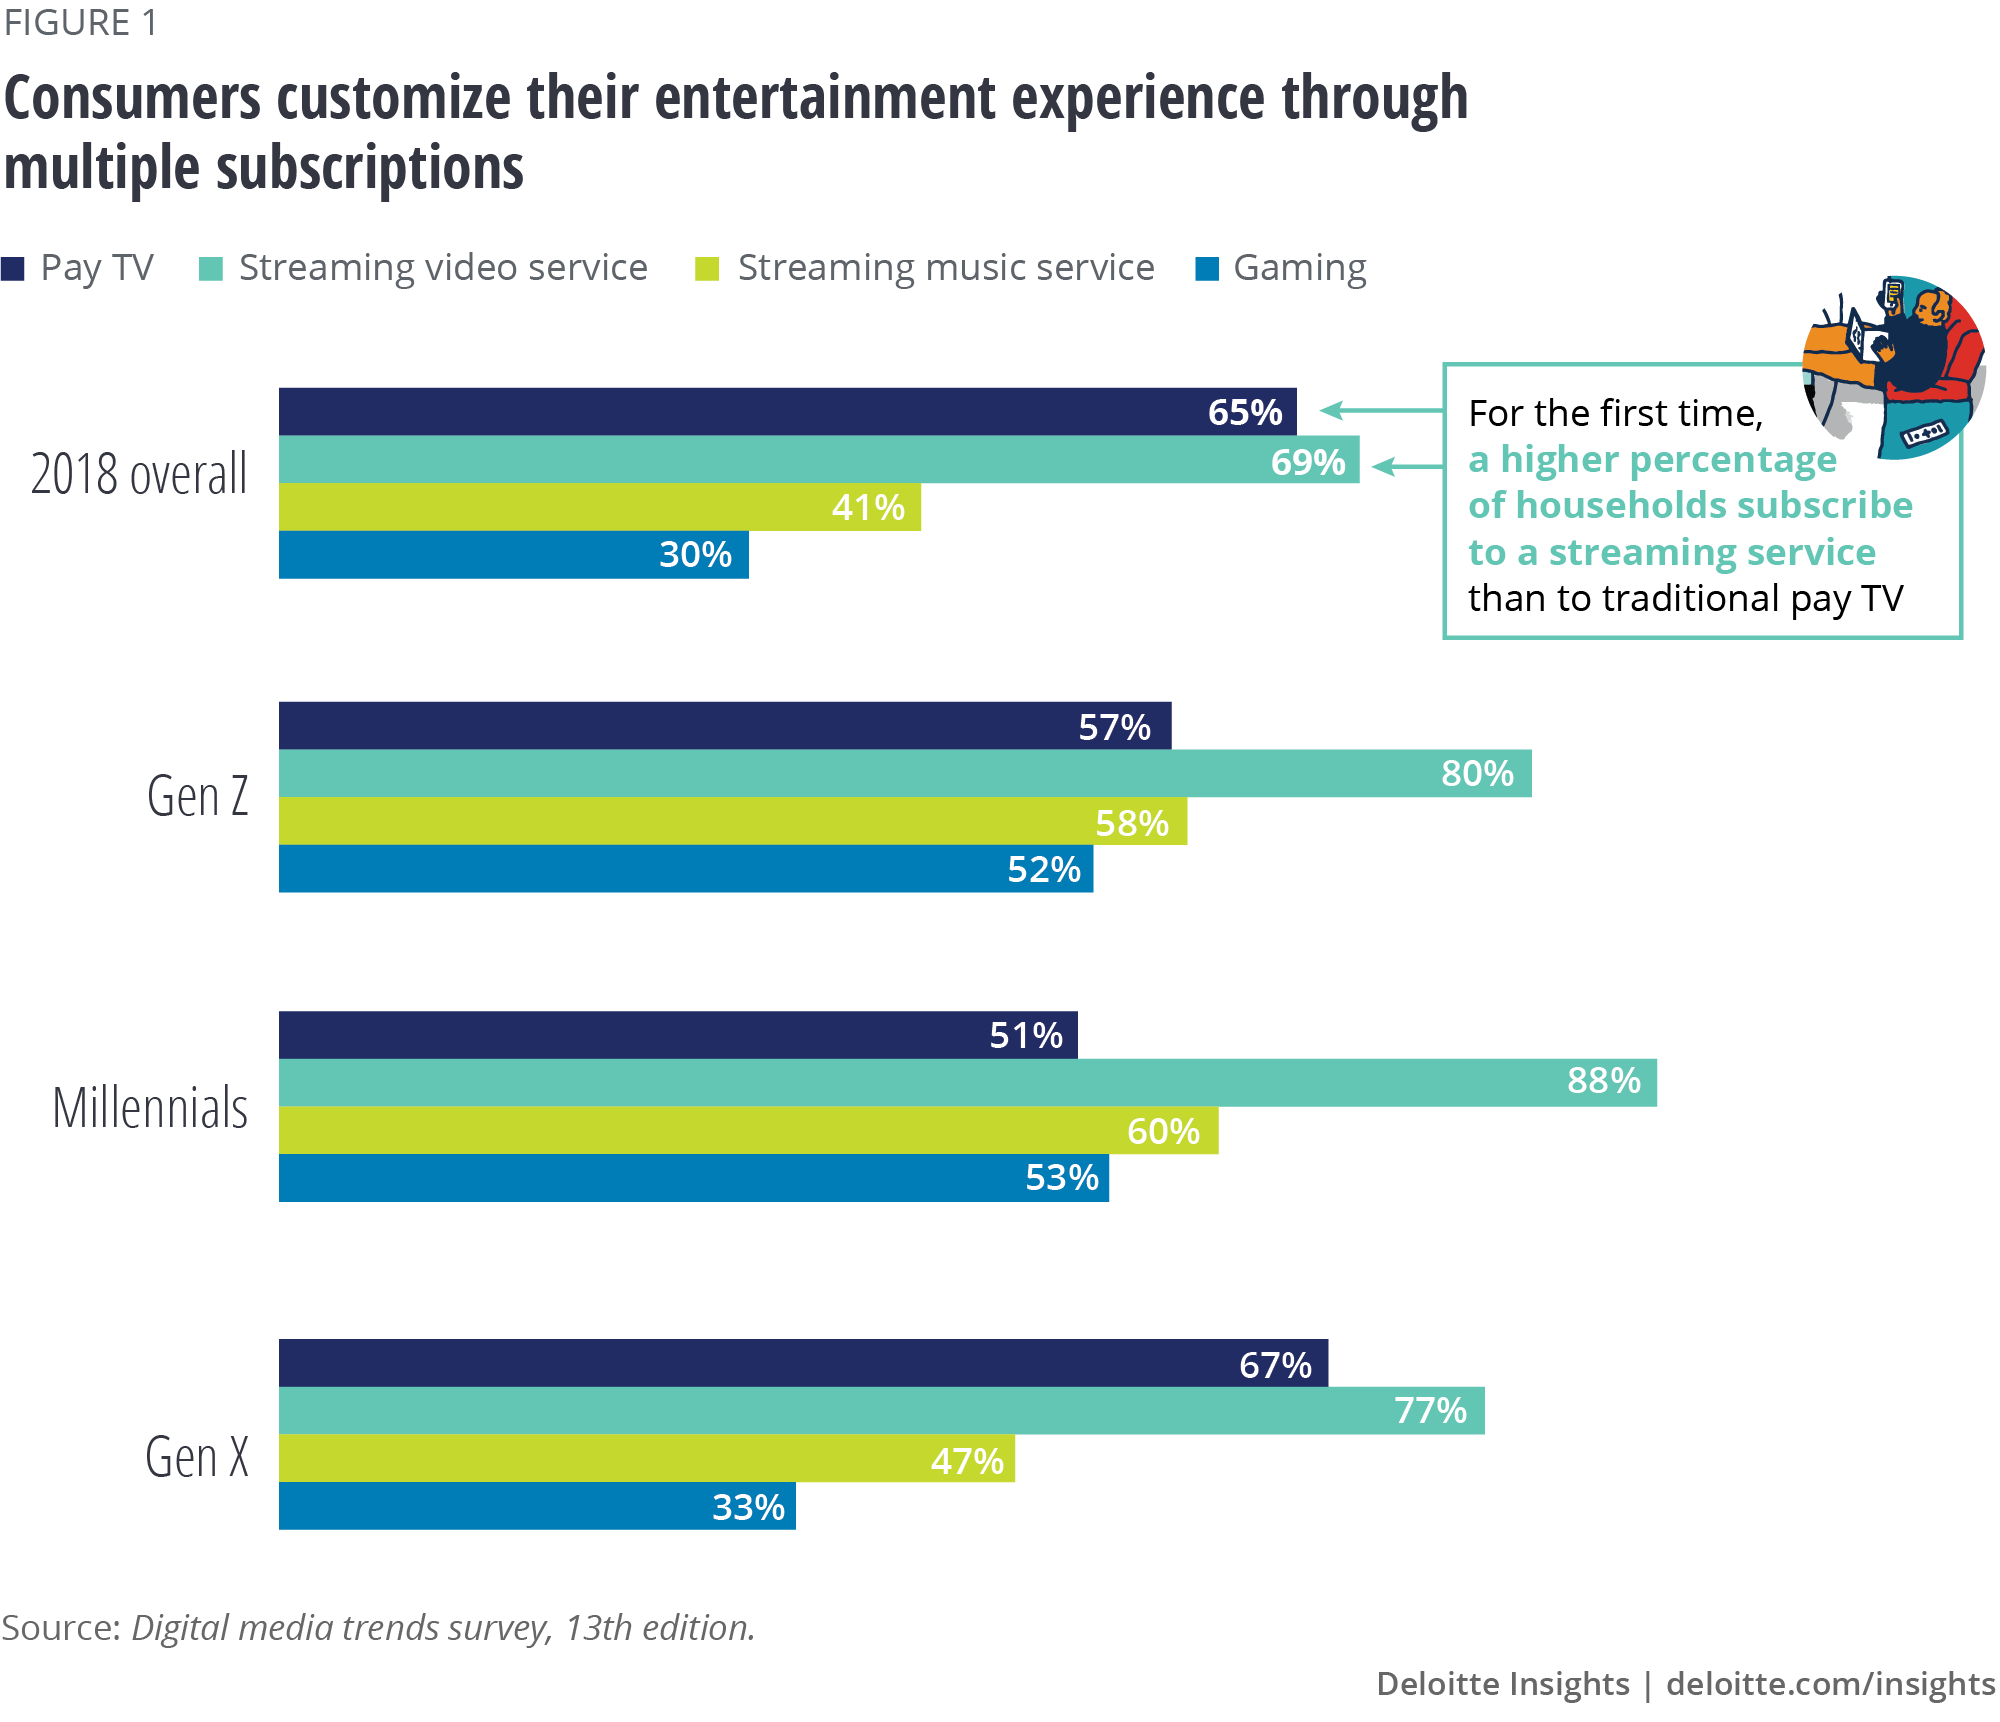 Consumers customize their entertainment experience through multiple subscriptions